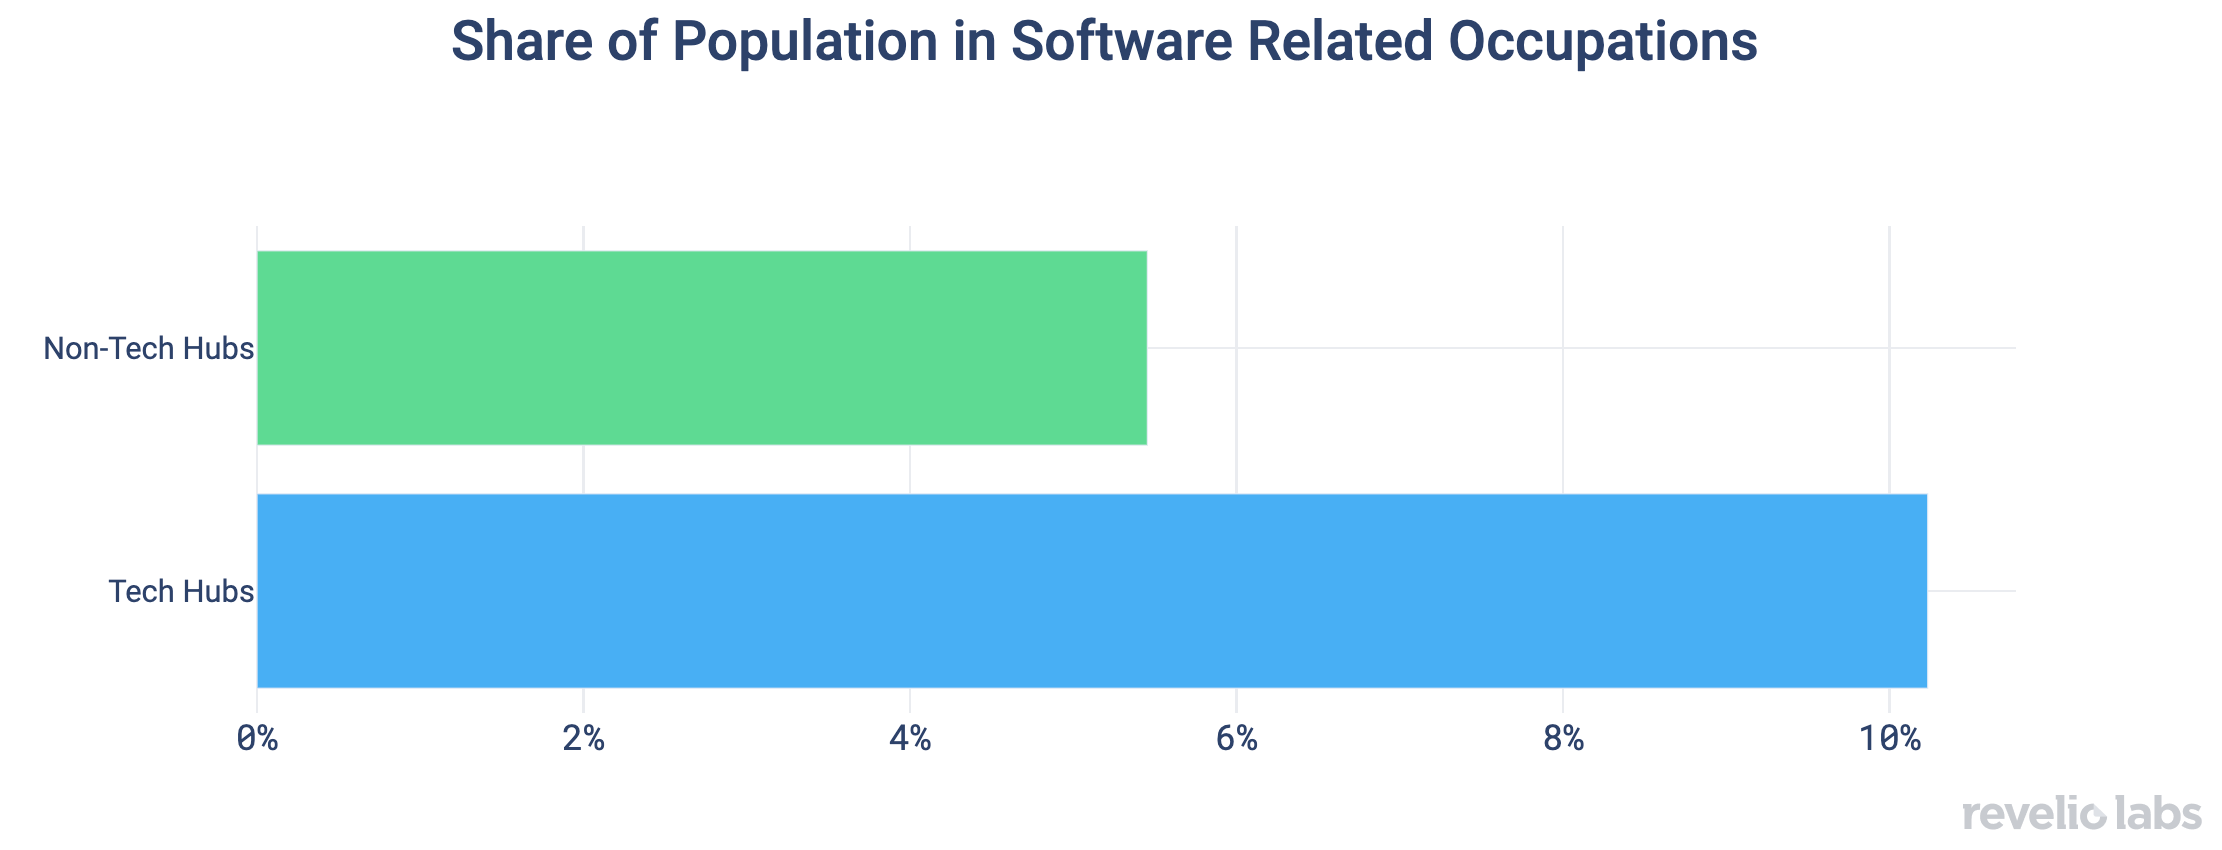 Share of Population in Software Related Occupations